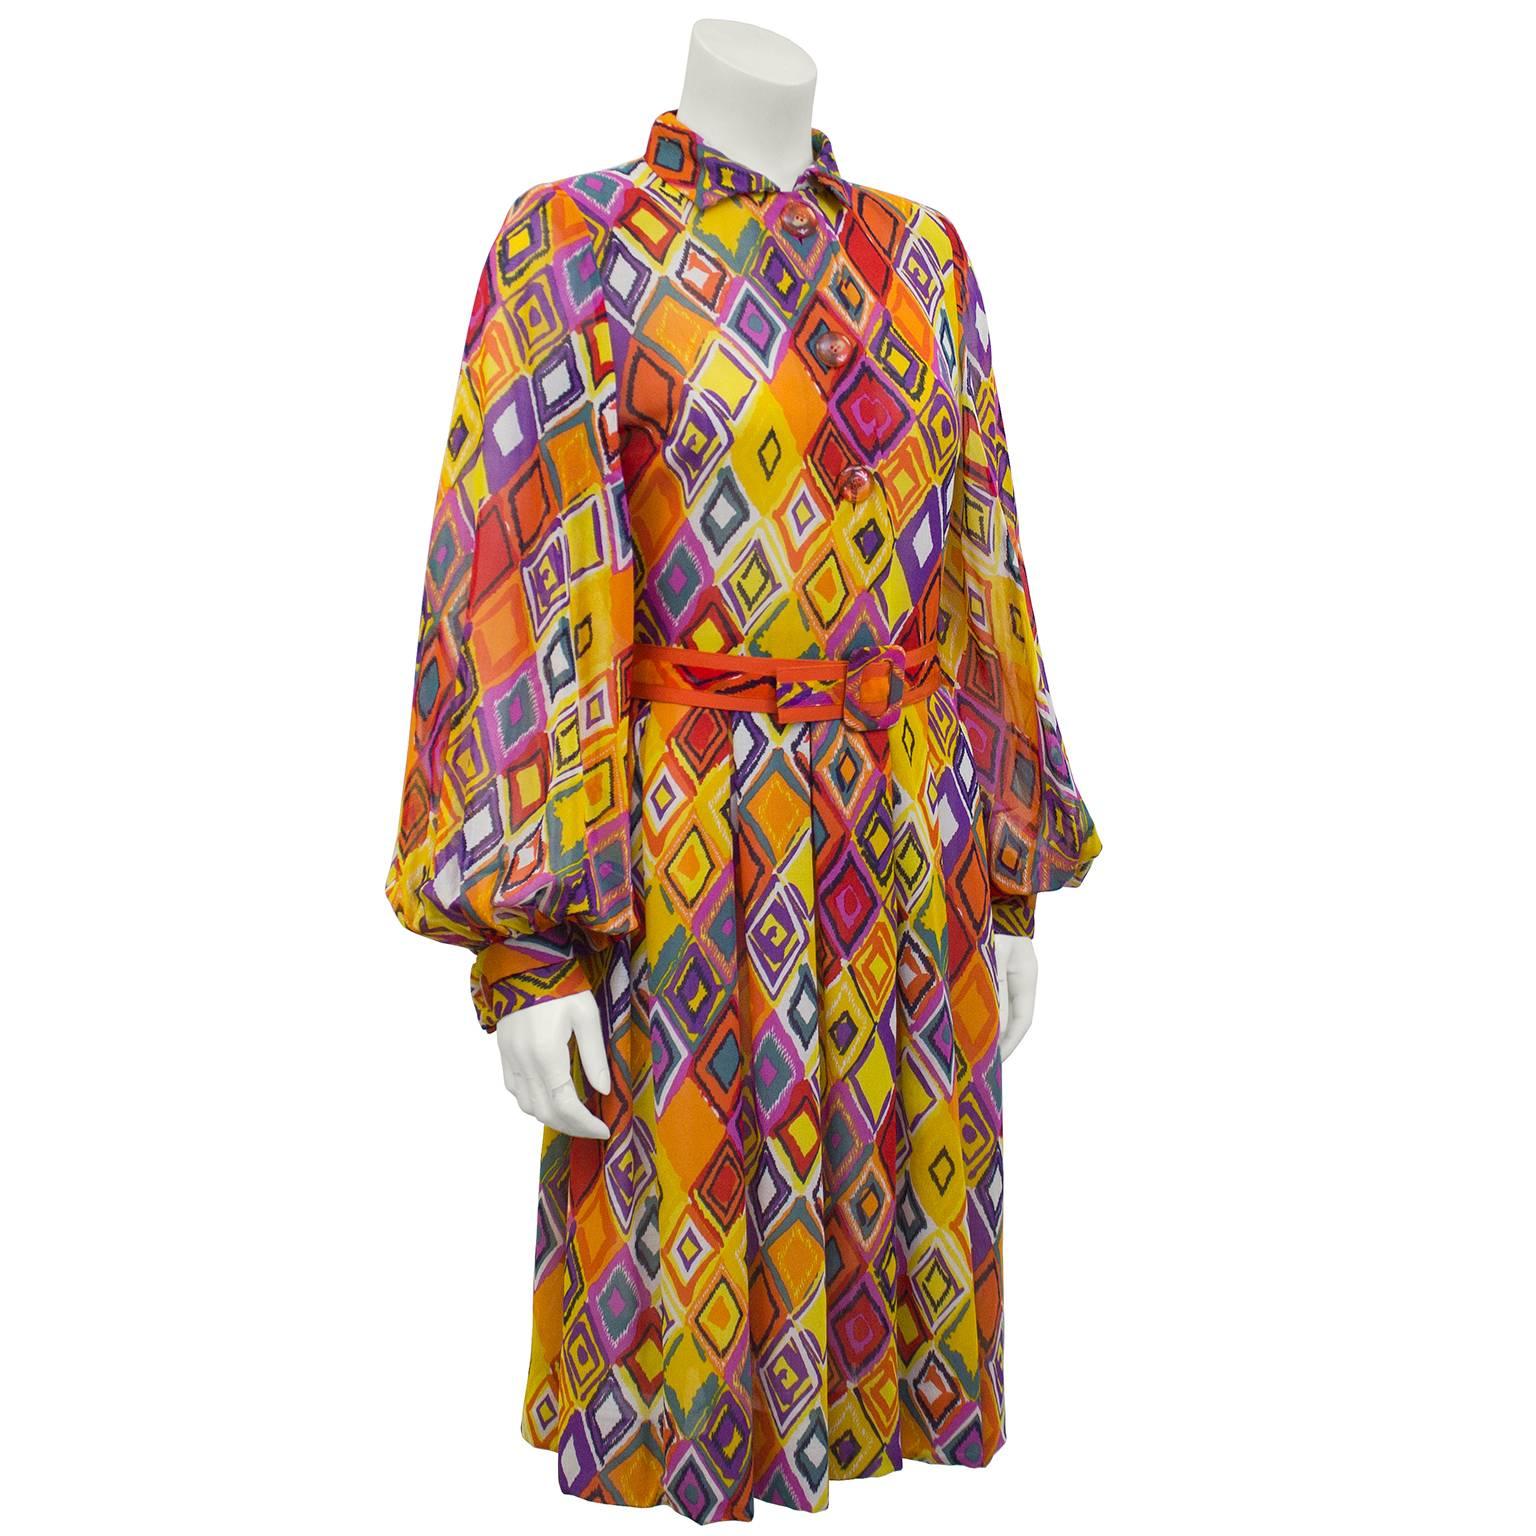 Pauline Trigere multi-colour diamond print fine cotton shirt dress. Large transparent orange plastic buttons, matching belt at waist and slightly gathered at cuff. Excellent vintage condition. Perfect resort getaway piece, folds into any carry on.